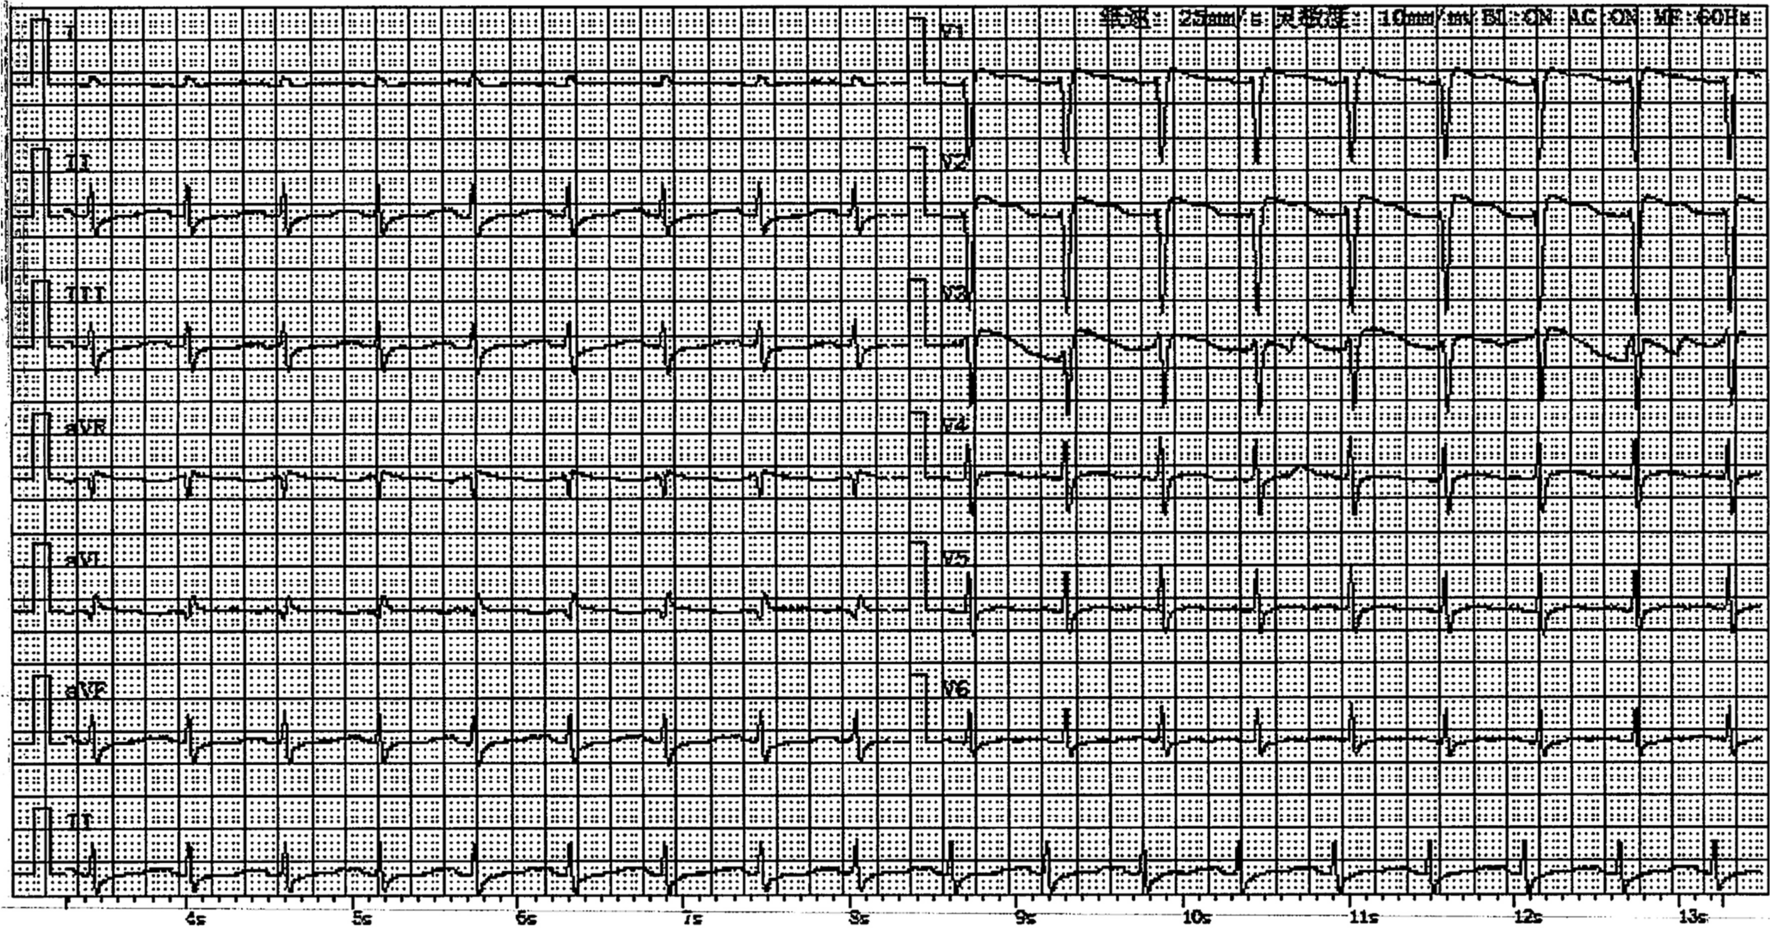 Cardiogenic shock in a 28-year-old woman associated with sibutramine use